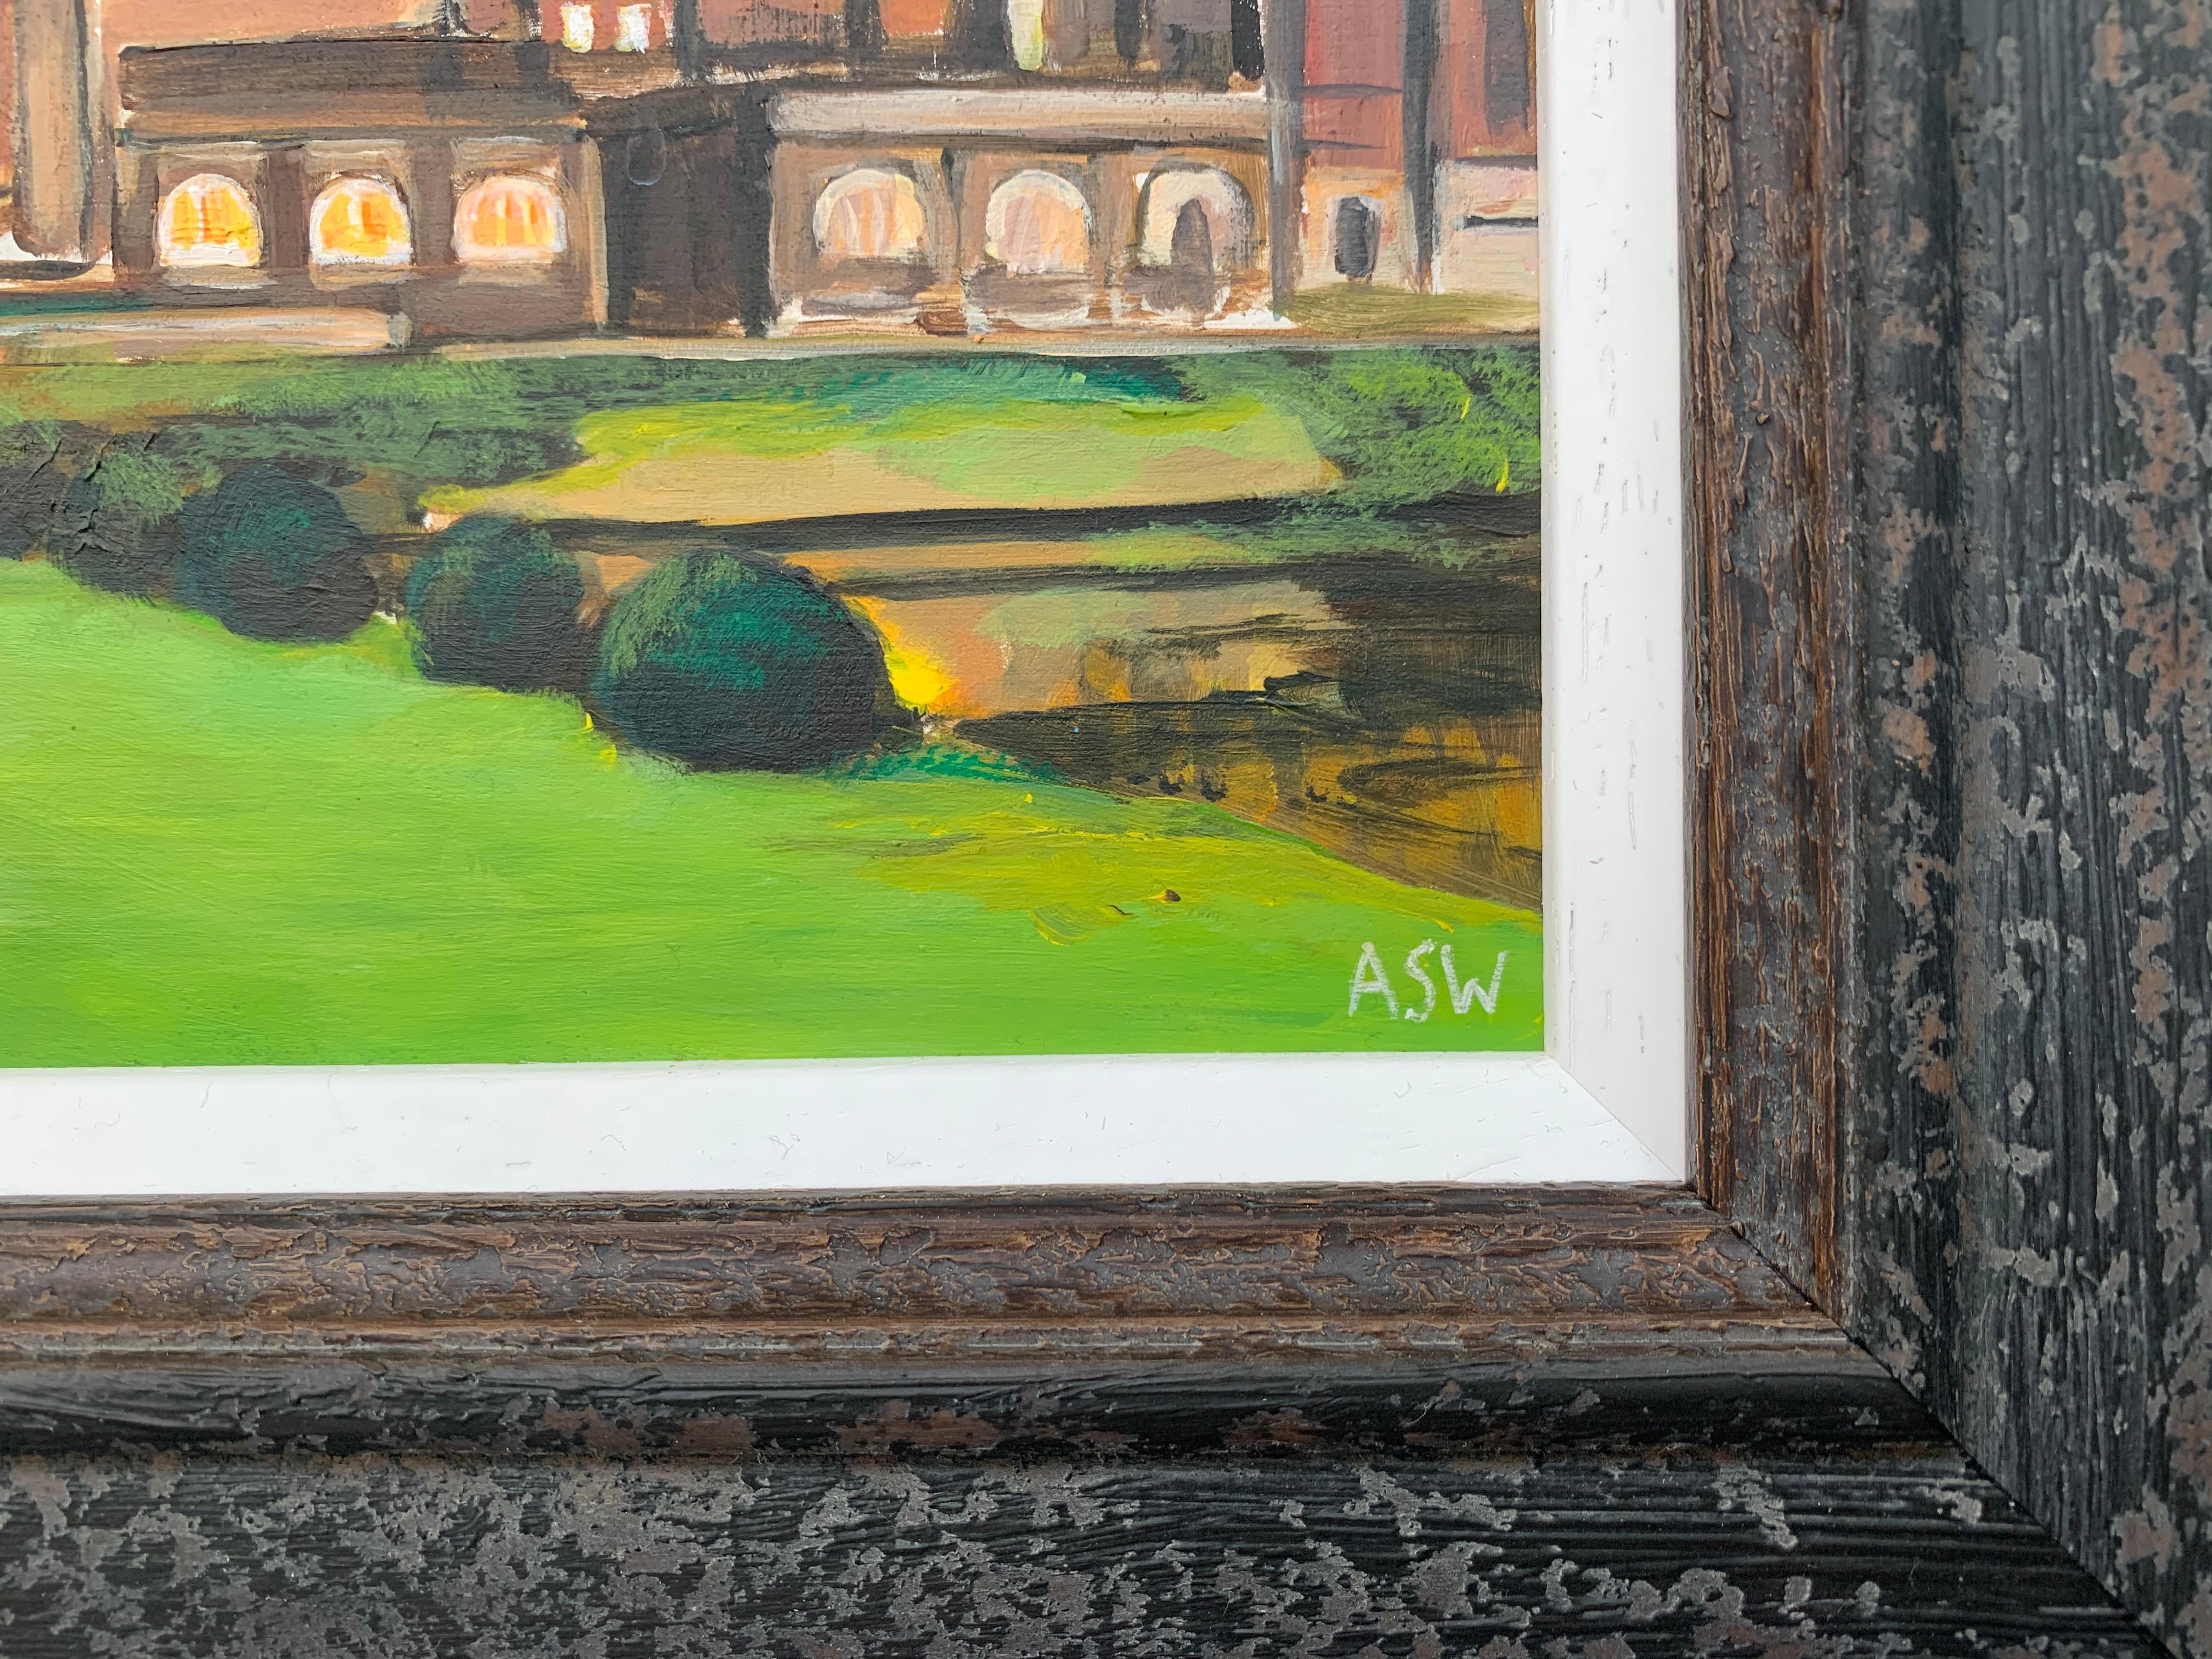 Stonyhurst College 16th Century Grade 1 Listed Building in English Countryside - Black Landscape Painting by Angela Wakefield